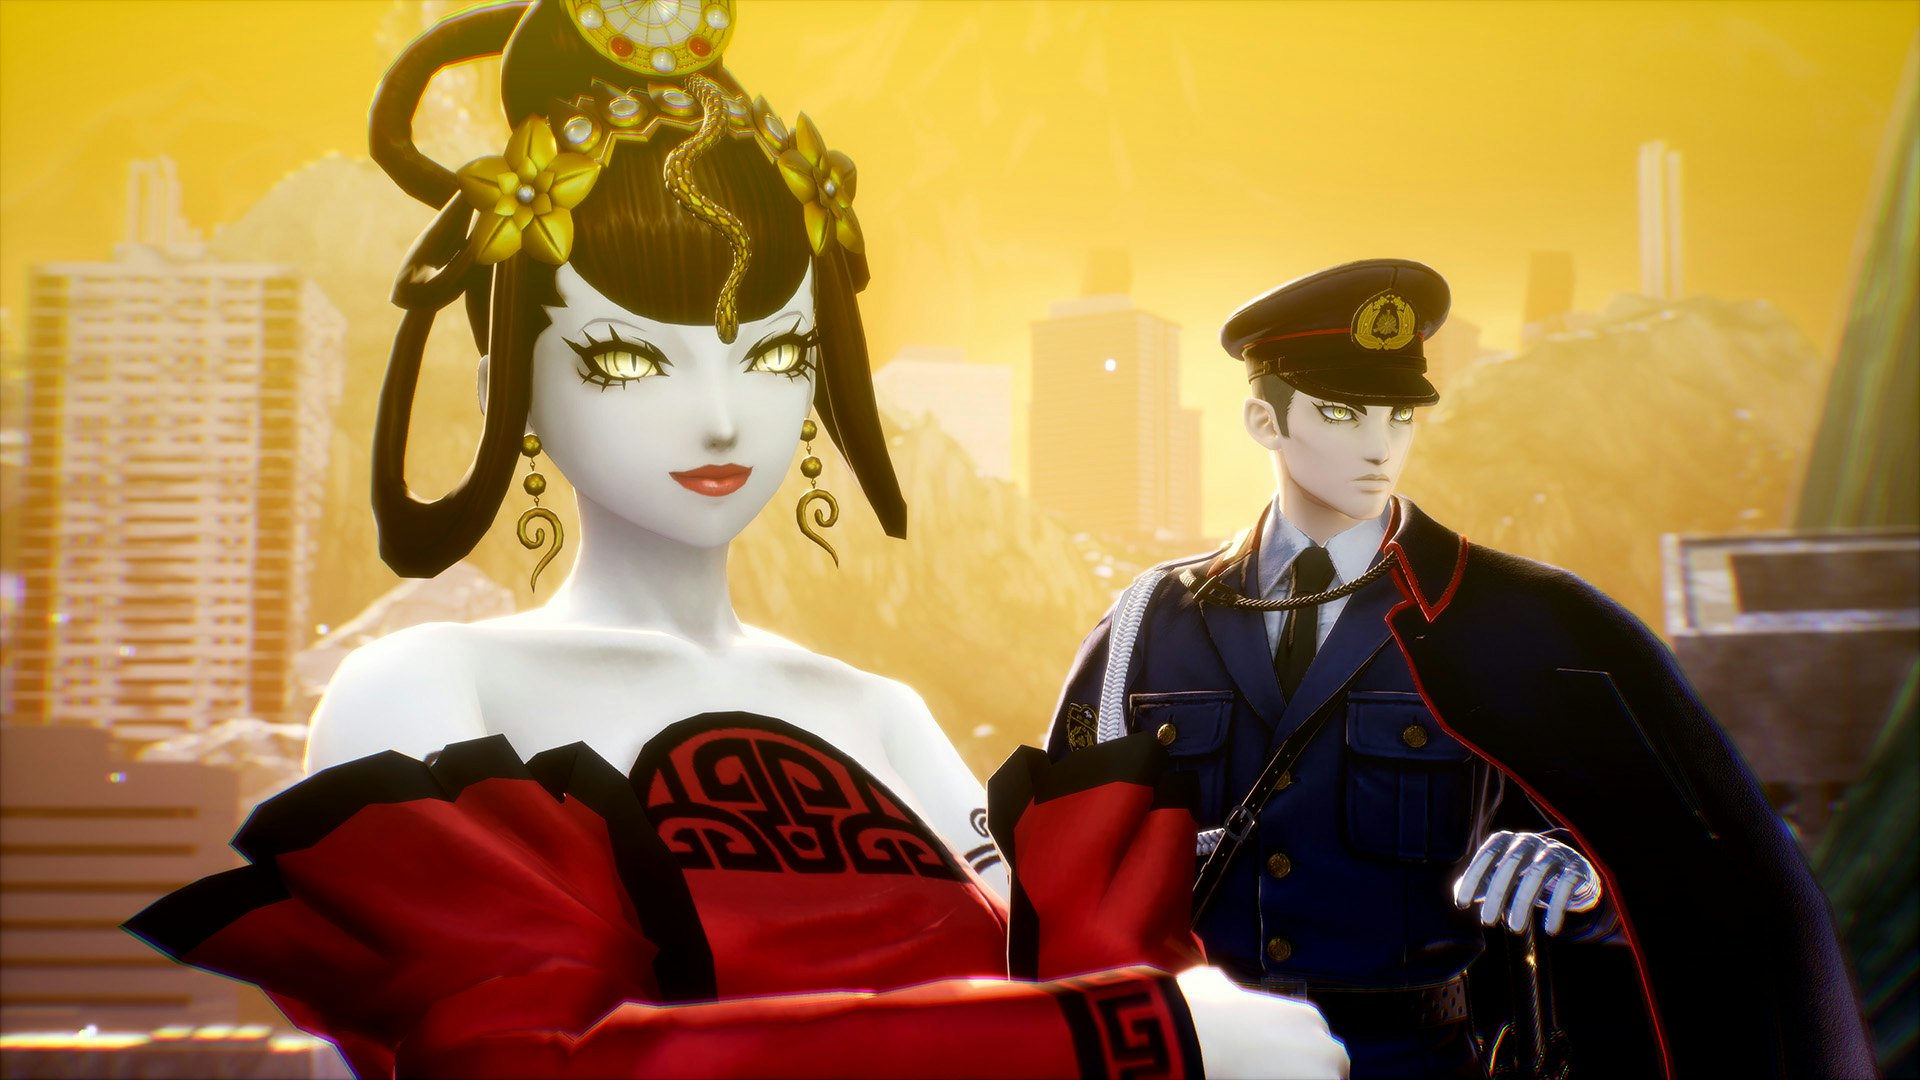 'Shin Megami Tensei V: Vengeance' Is the 'Persona 5' Fix You’ve Been Looking For